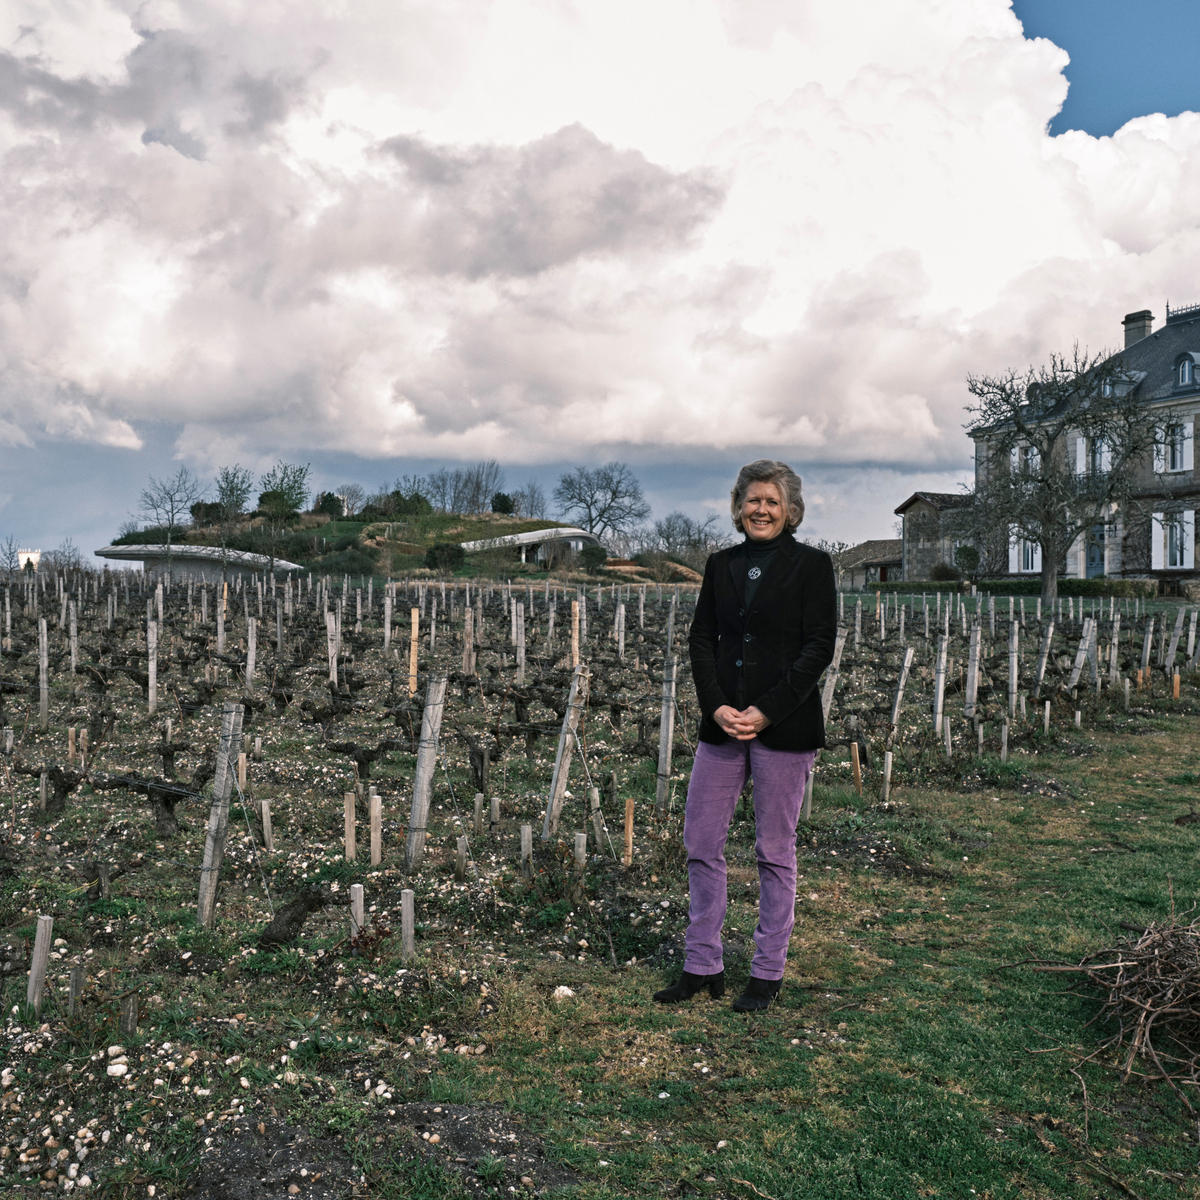 Véronique Sanders among the vines at Château Haut-Bailly.